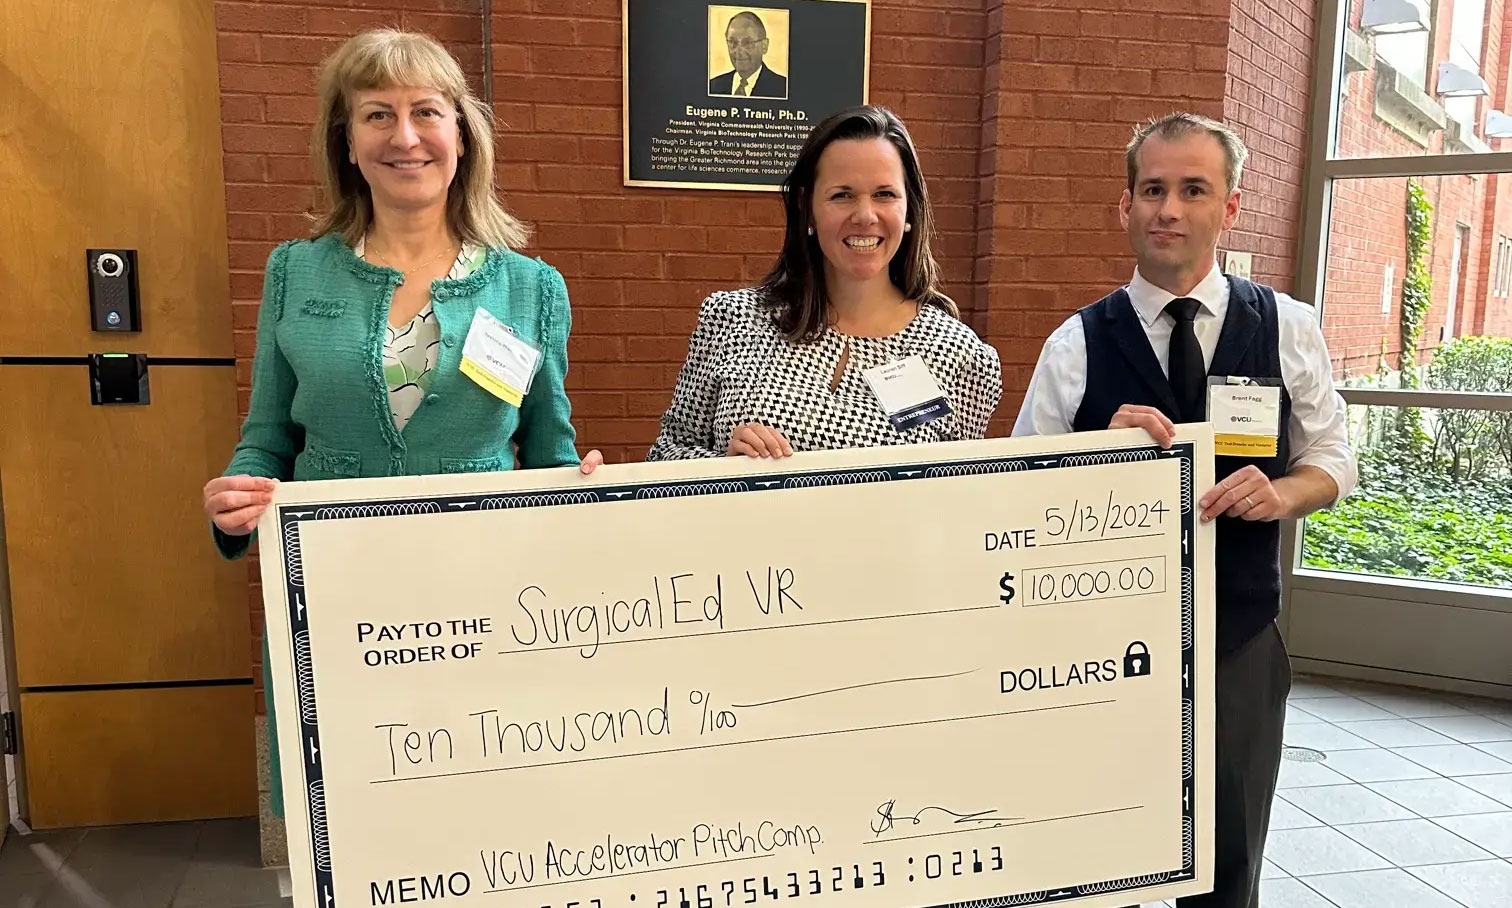 Ivelina Metcheva, Ph.D., assistant vice president for innovation at VCU TechTransfer and Ventures; Lauren Siff, M.D., representing the winning team SurgicalED VR; and Brent Fagg, assistant director for innovation at VCU TechTransfer and Ventures, at the VCU Startup Accelerator’s first Pitch Day competition.